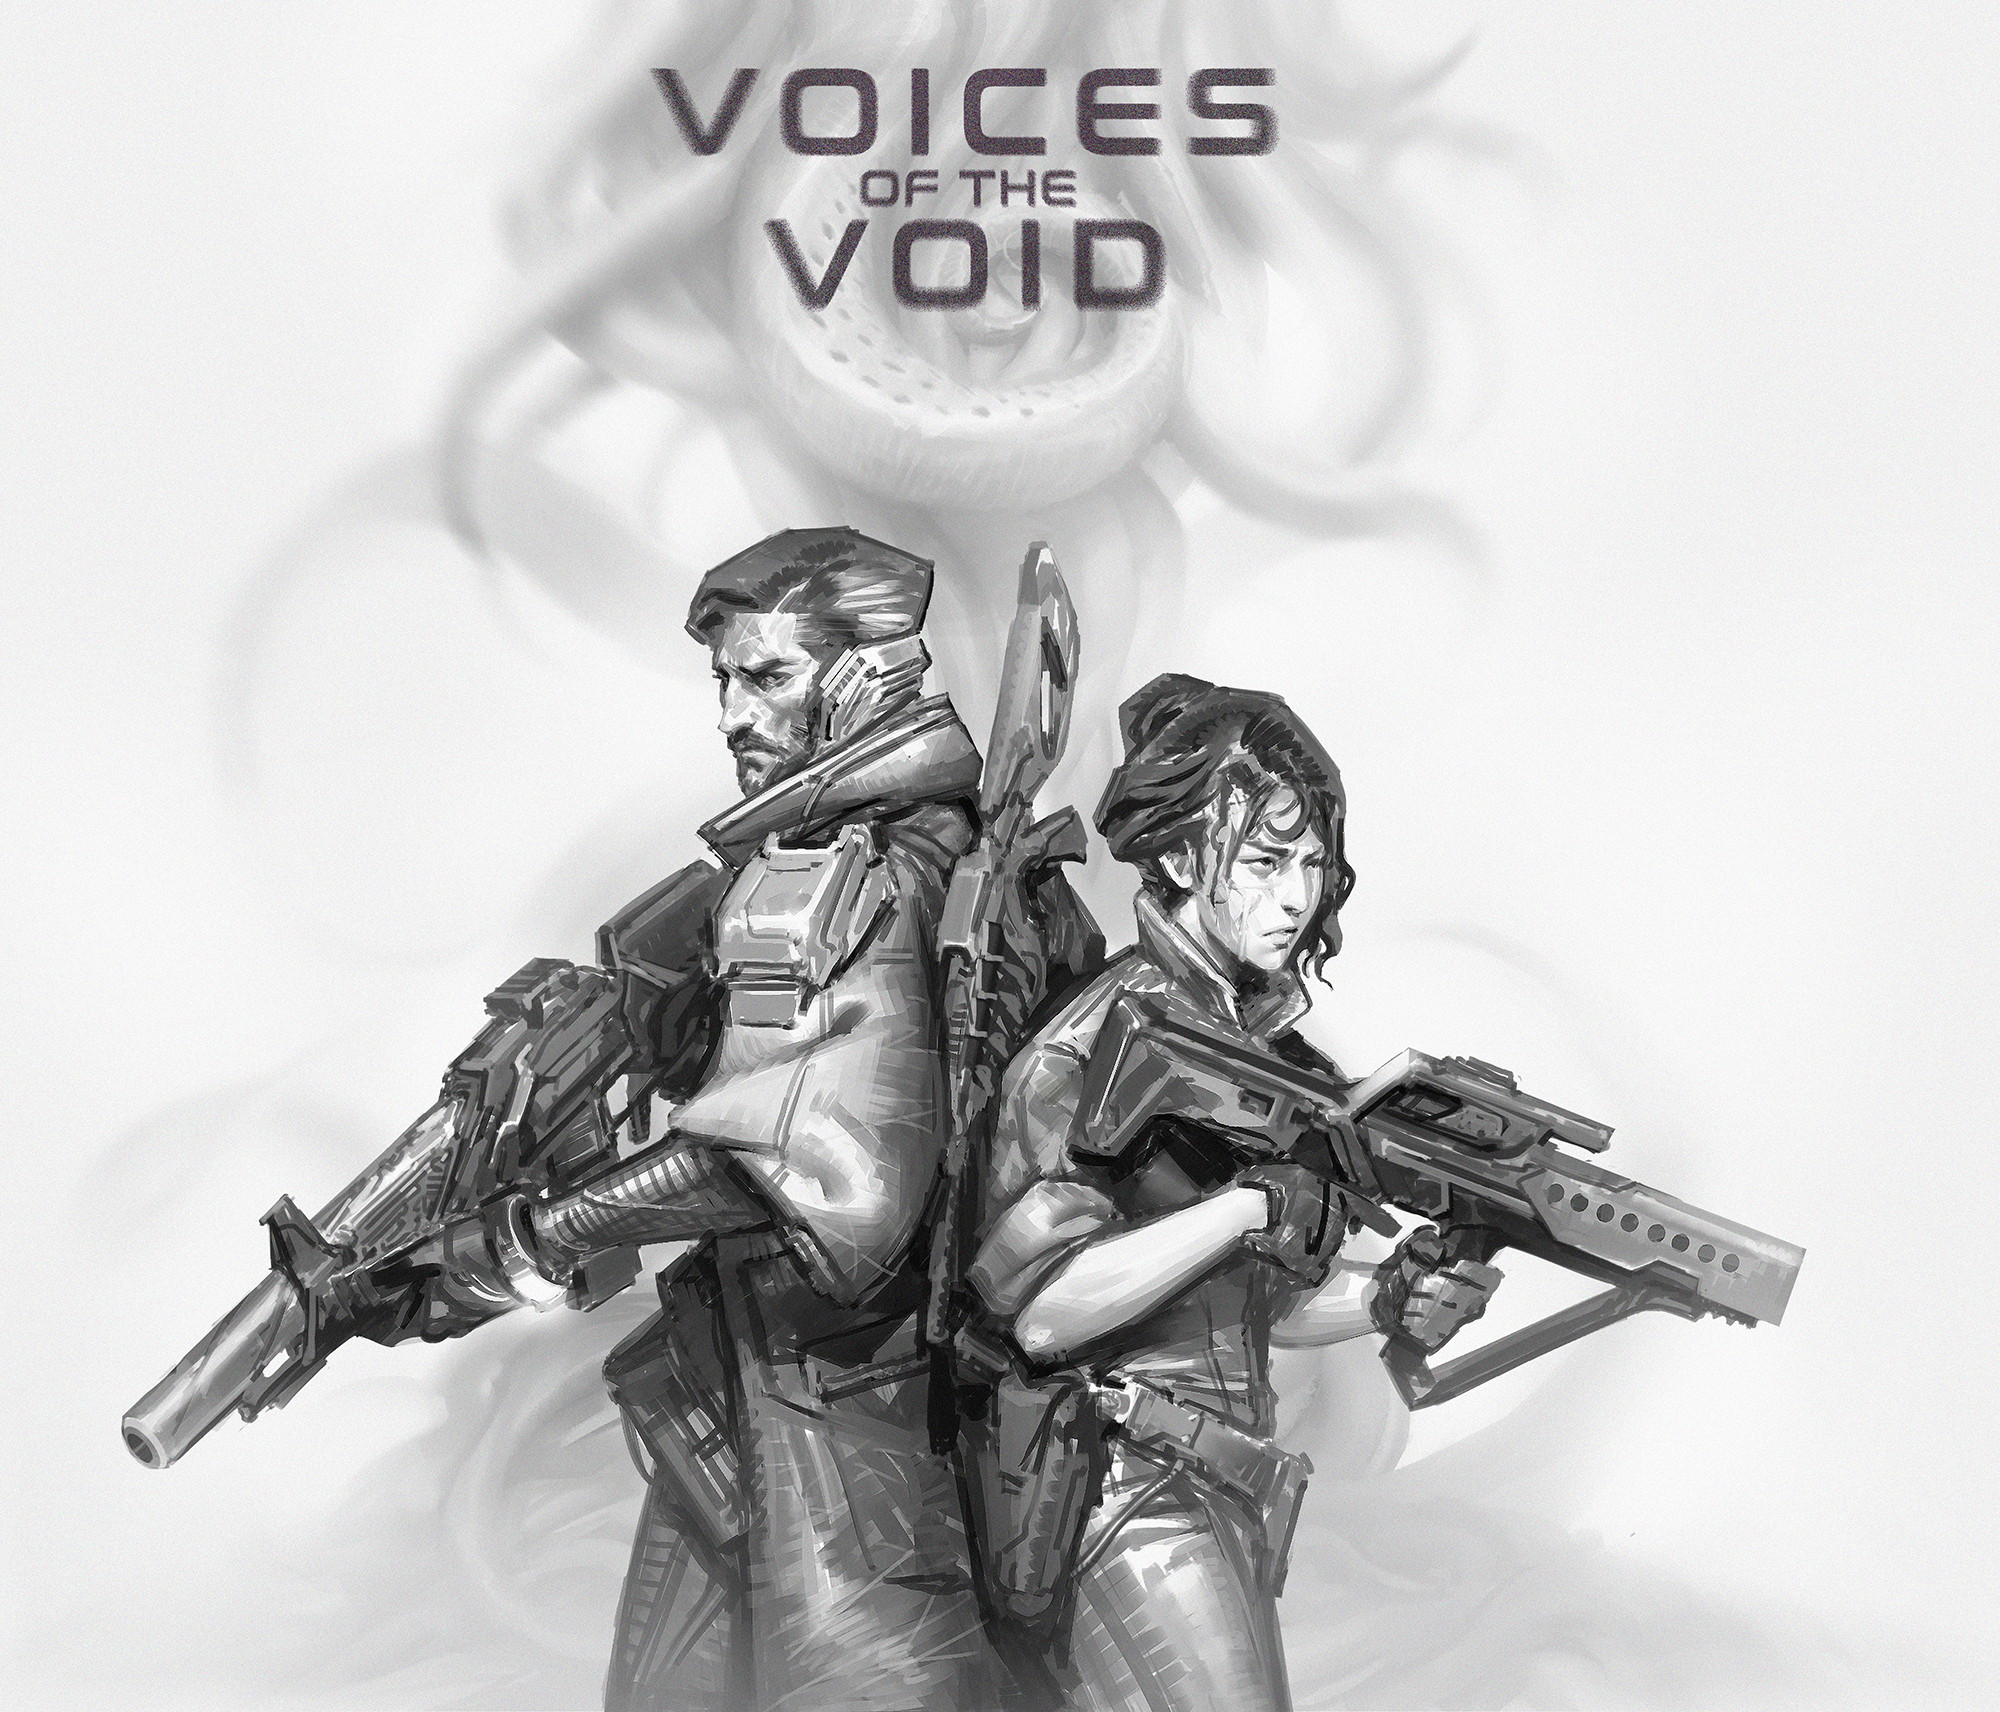 Ariral poster. Voices of the Void. Voices of the Void ariral. Voices of the Void Argemia. Voices of the Void kerfus.